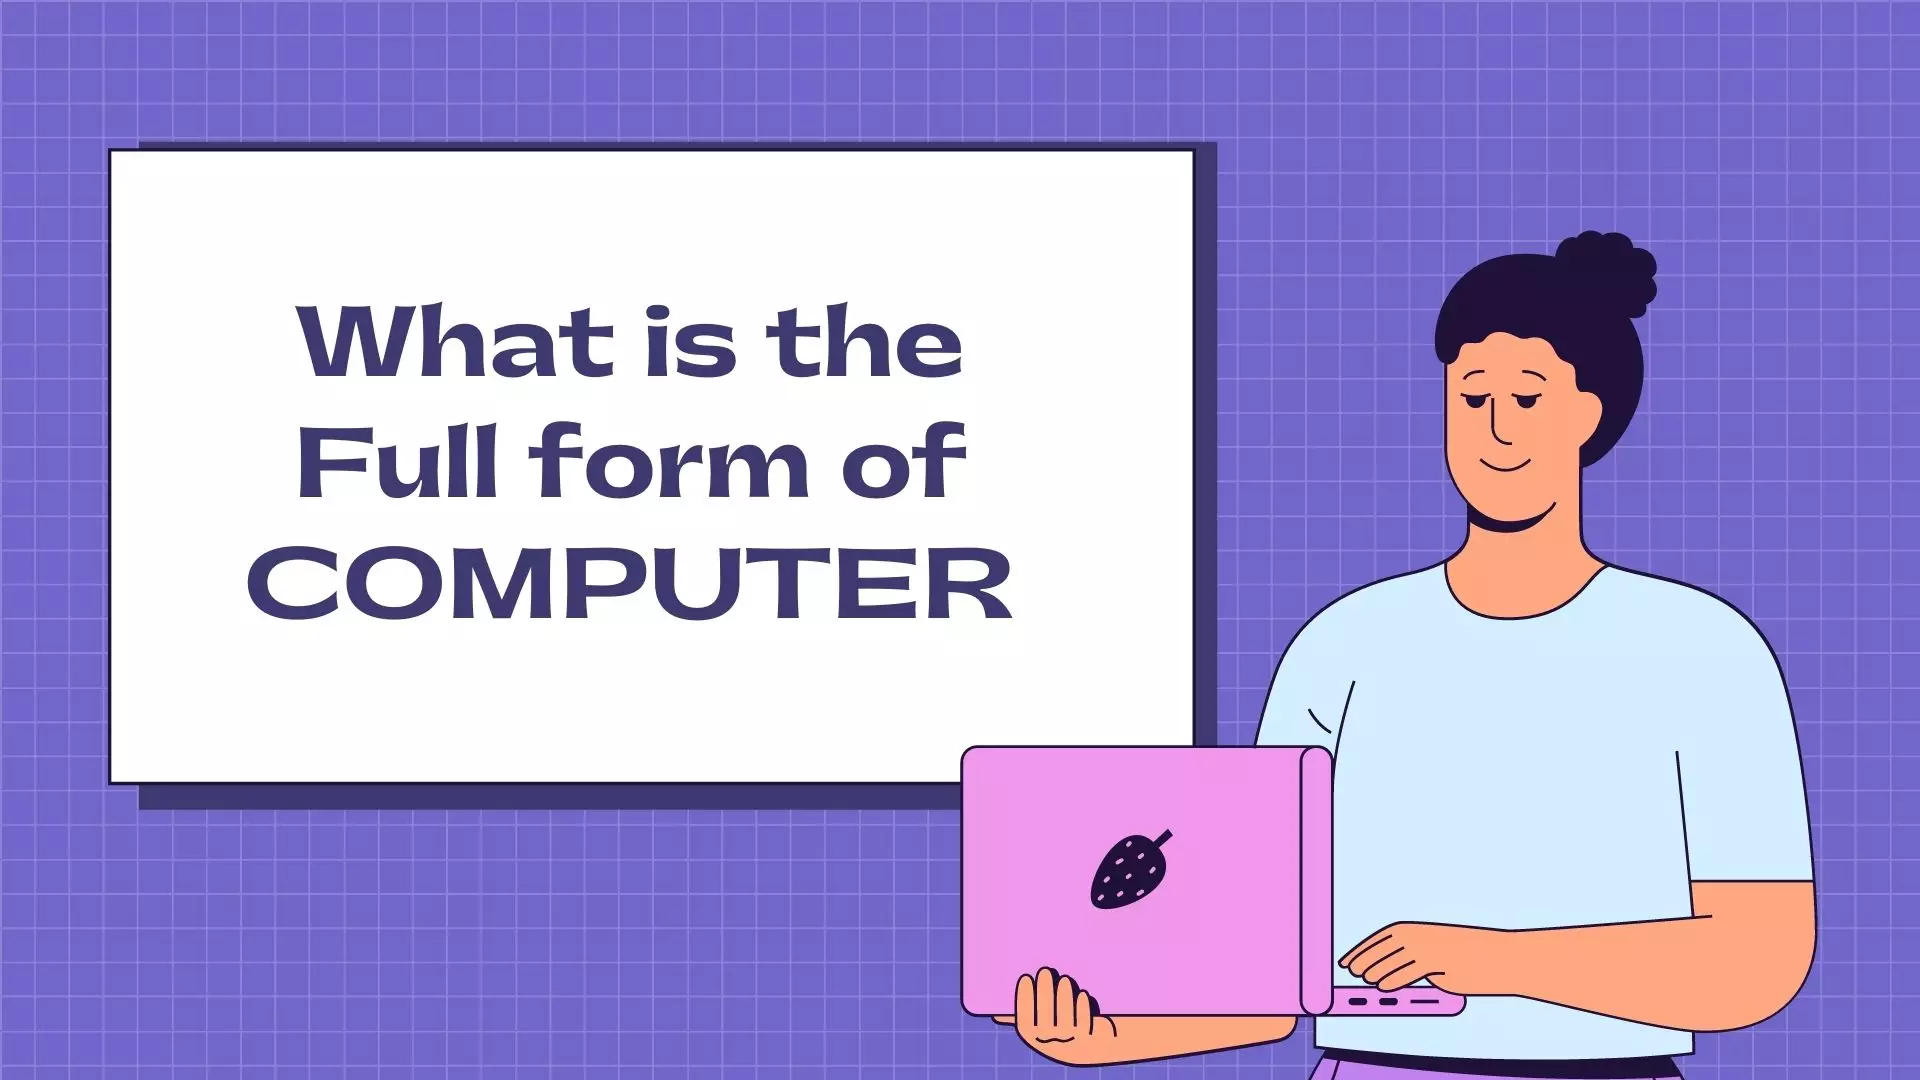 COMPUTER Full Form – What is the Full form of COMPUTER